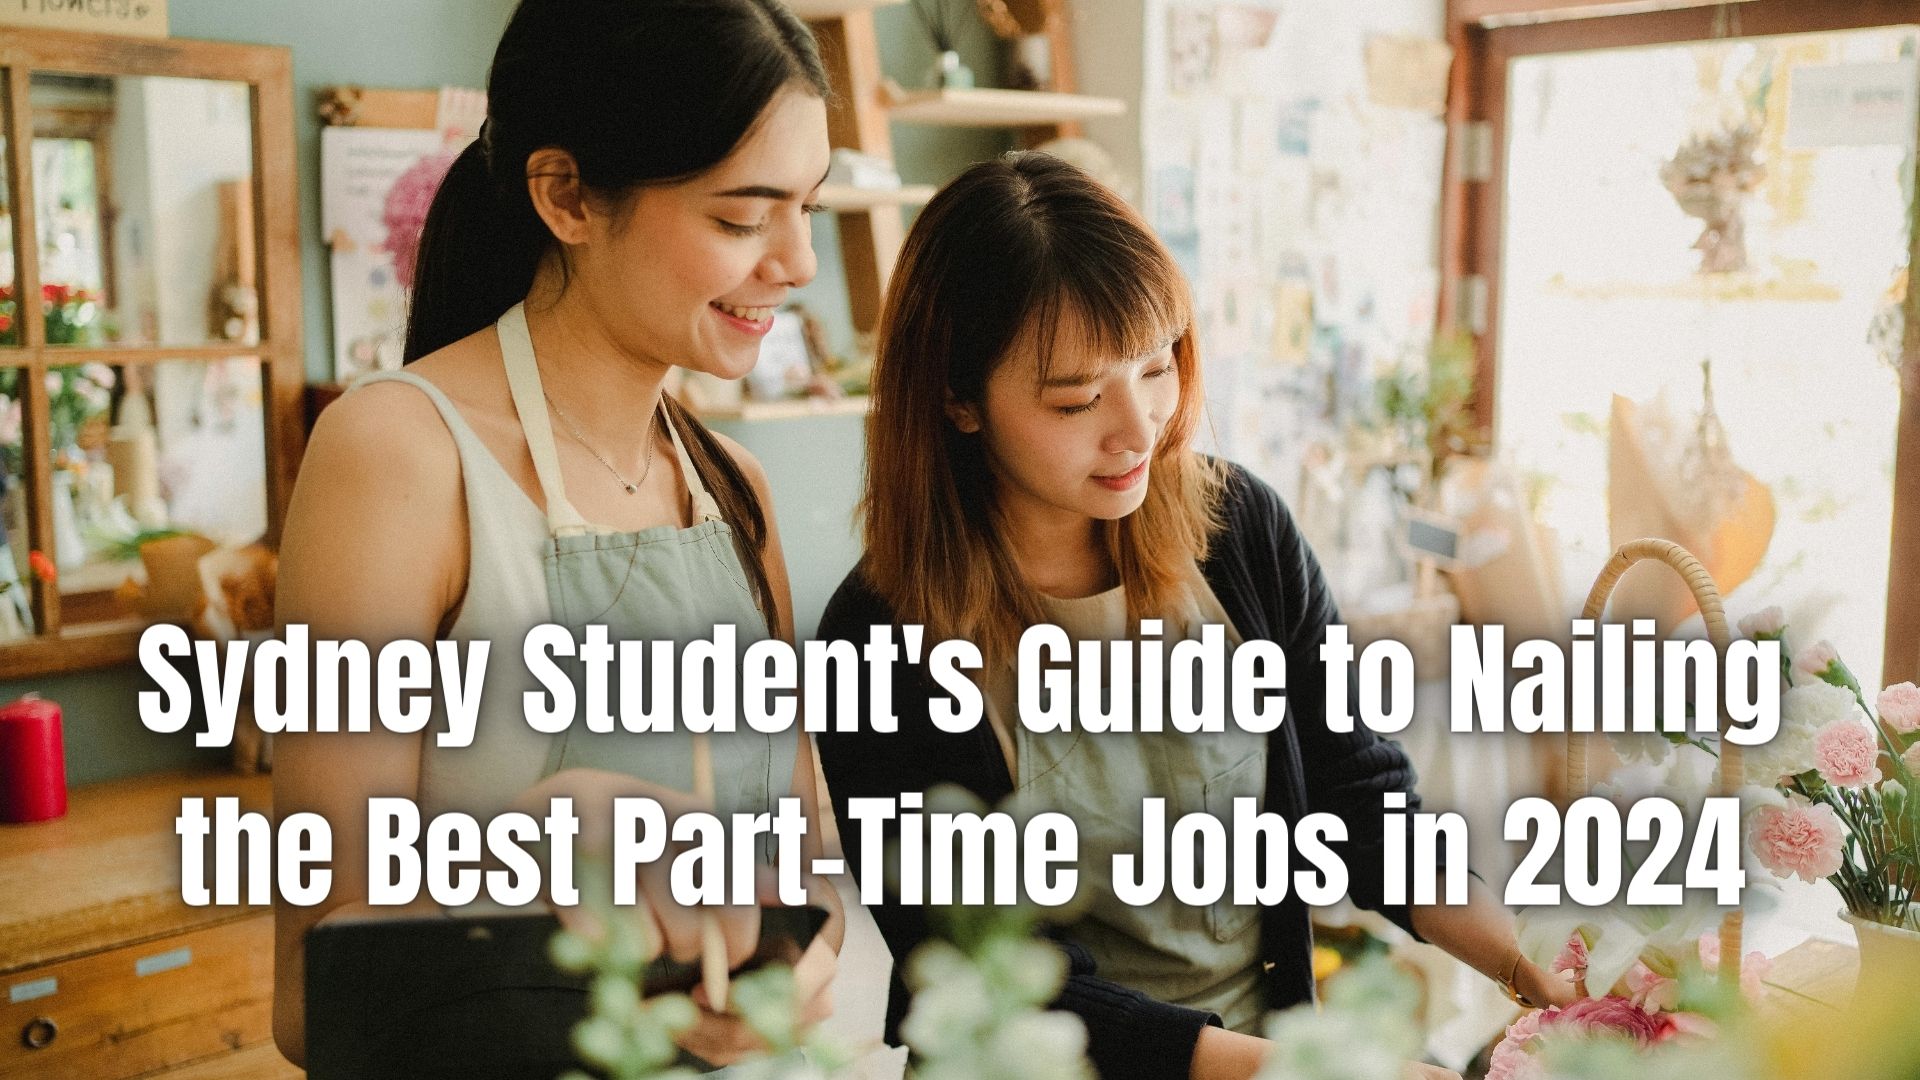 Sydney Students! Juggling studies and finances? Our guide unlocks the best part-time jobs (2024). Find flexible work & boost your resume!